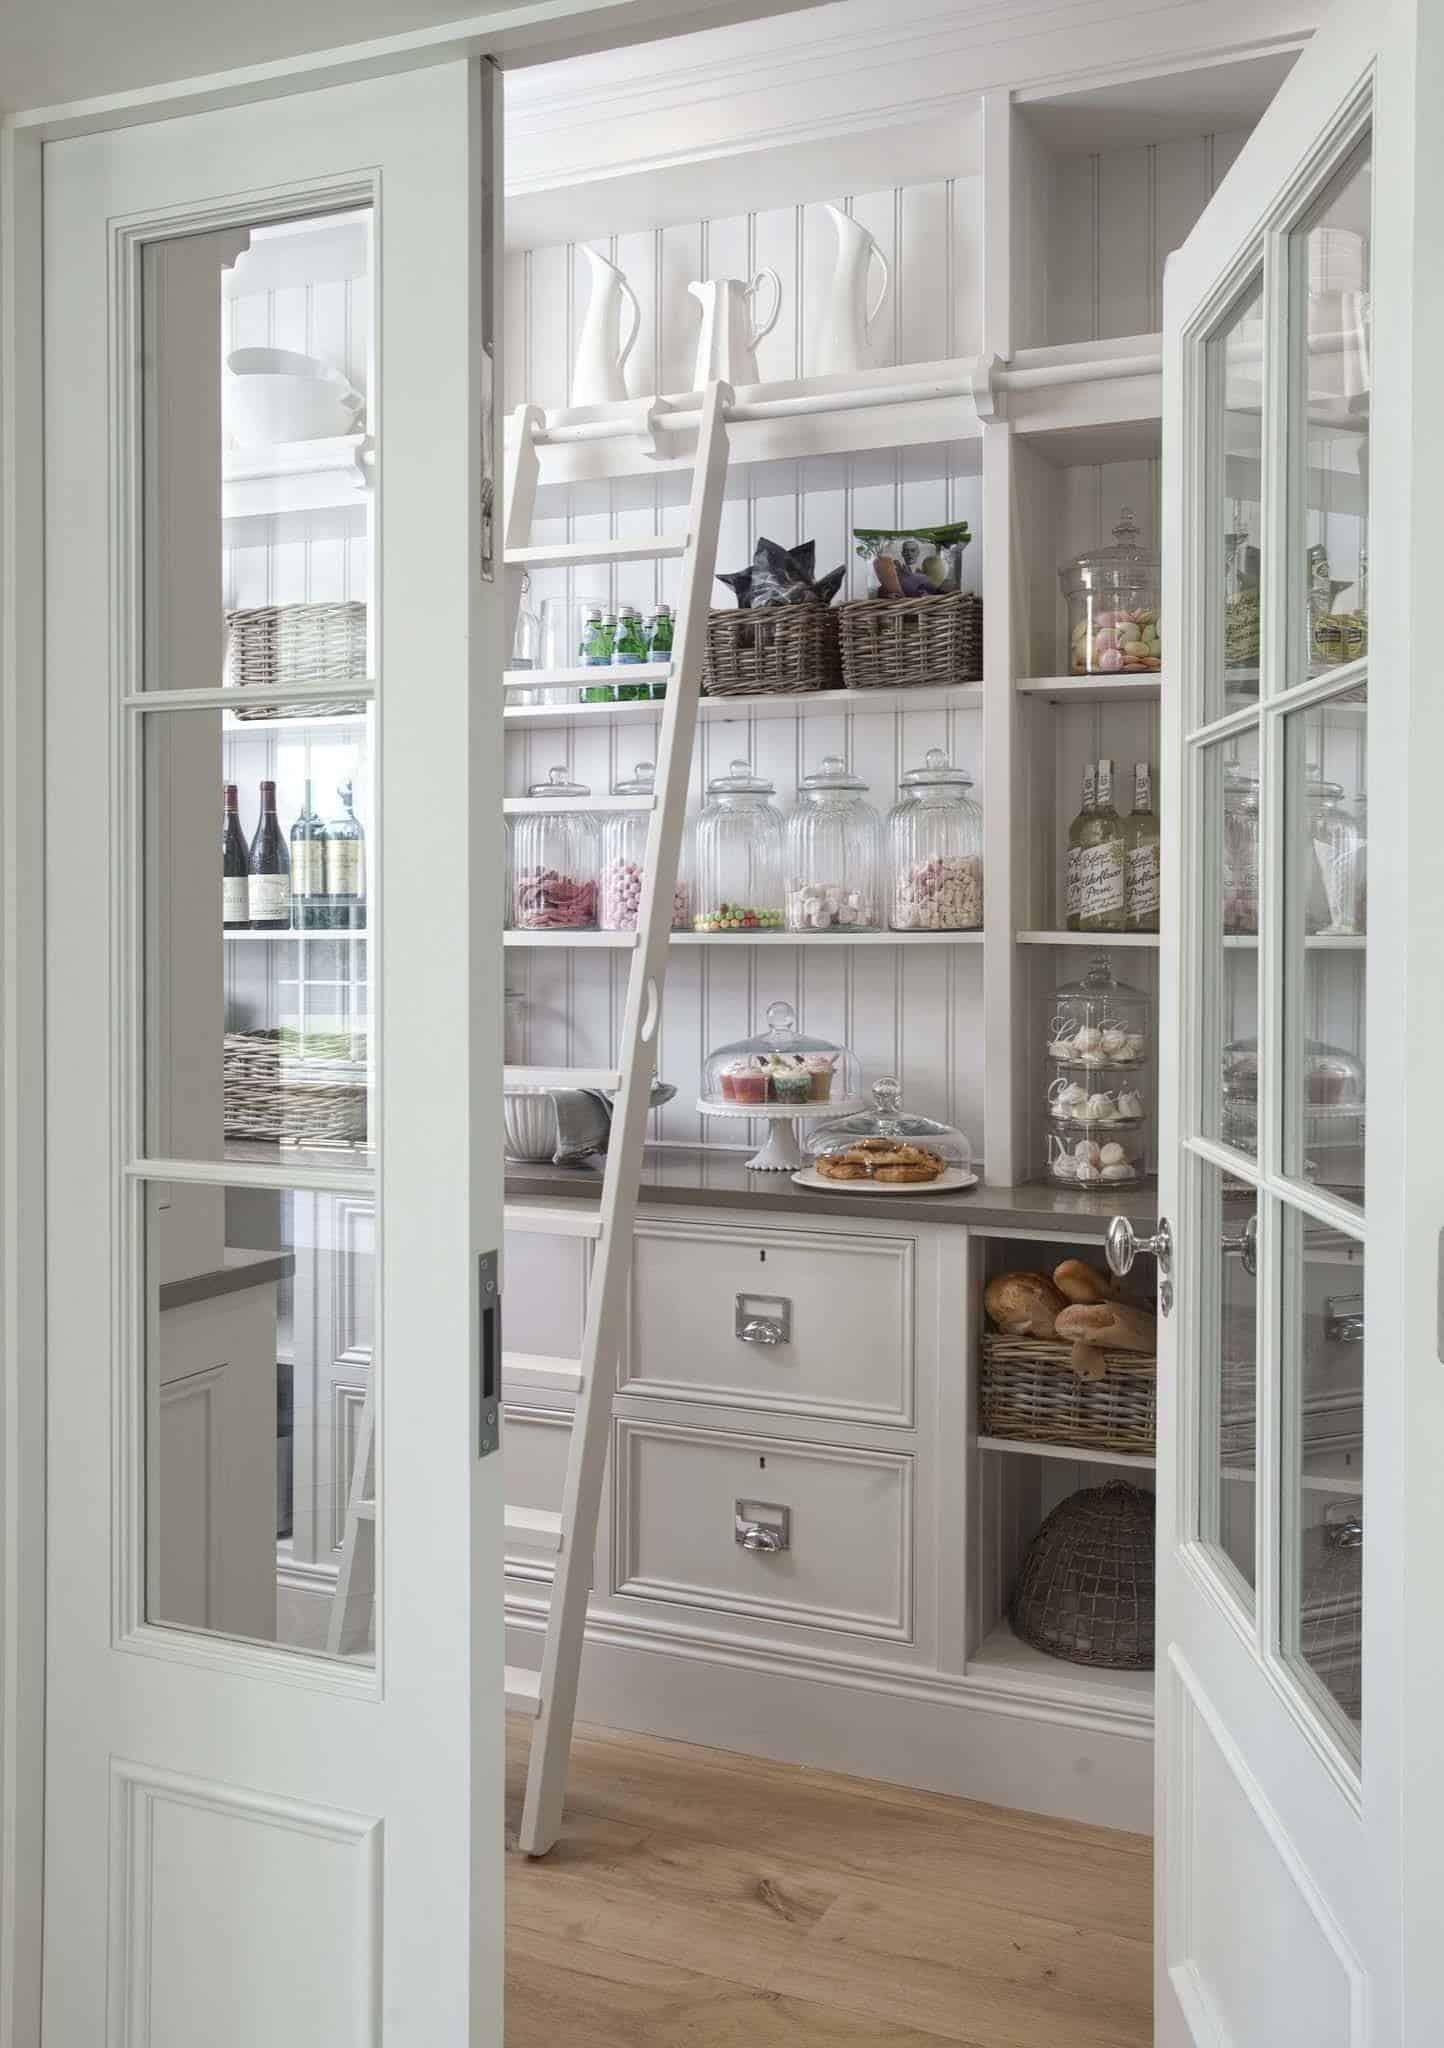 35 Clever ideas to help organize your kitchen pantry